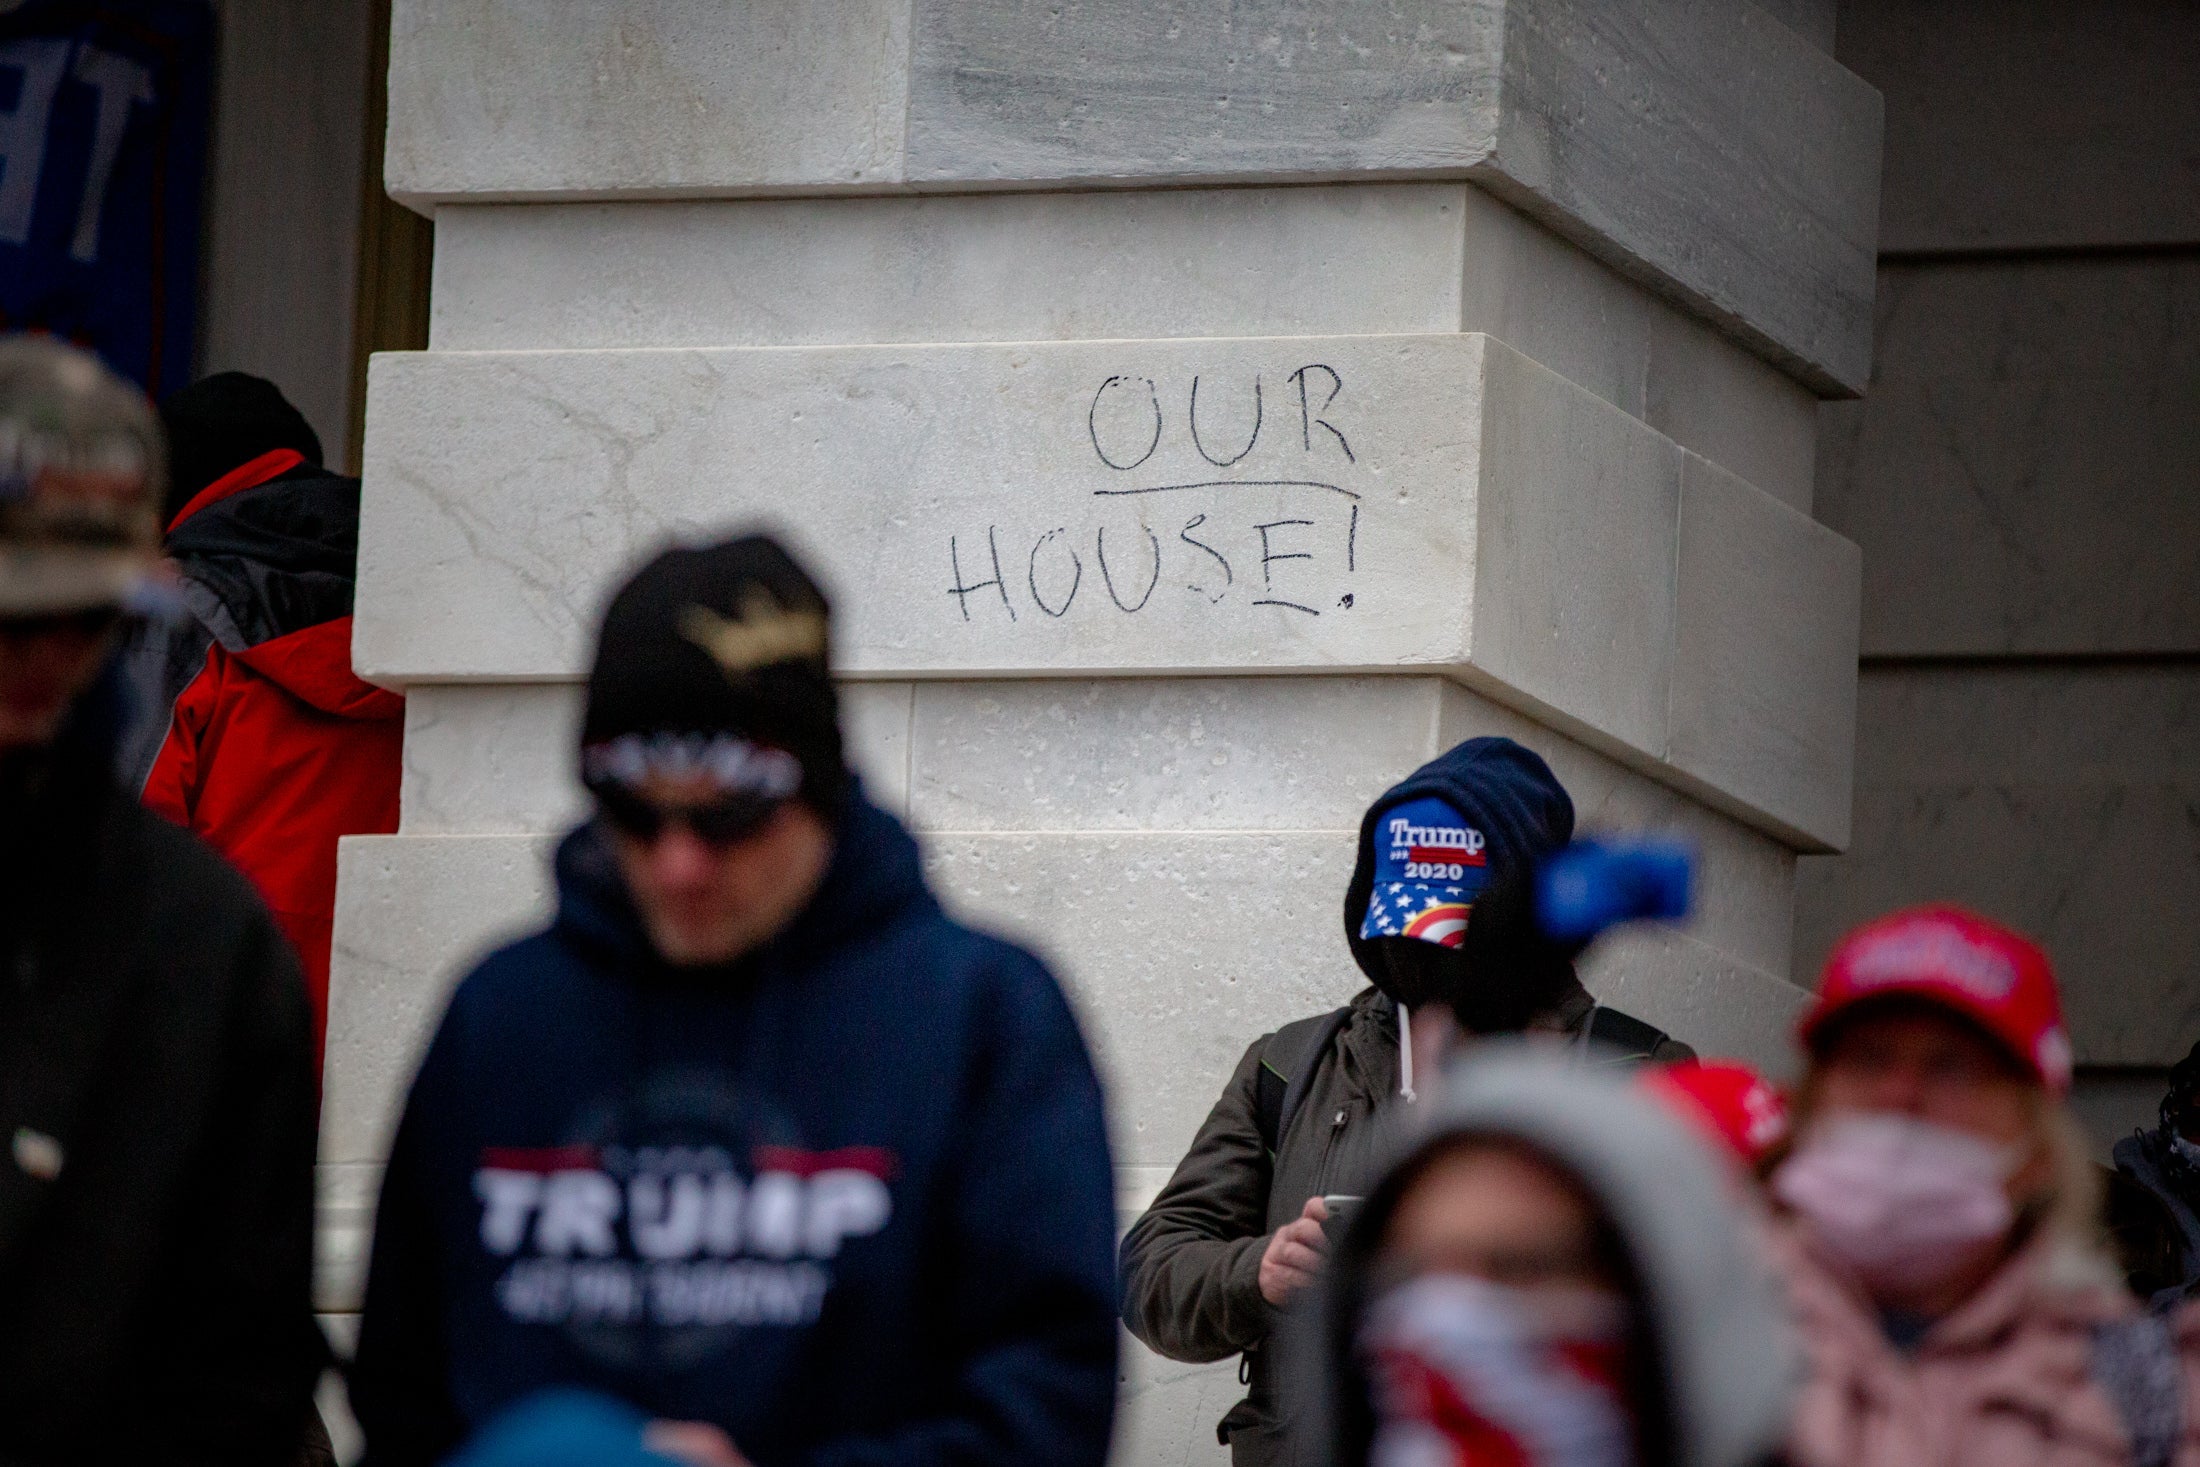 Graffiti outside the Capitol reads "OUR HOUSE!"